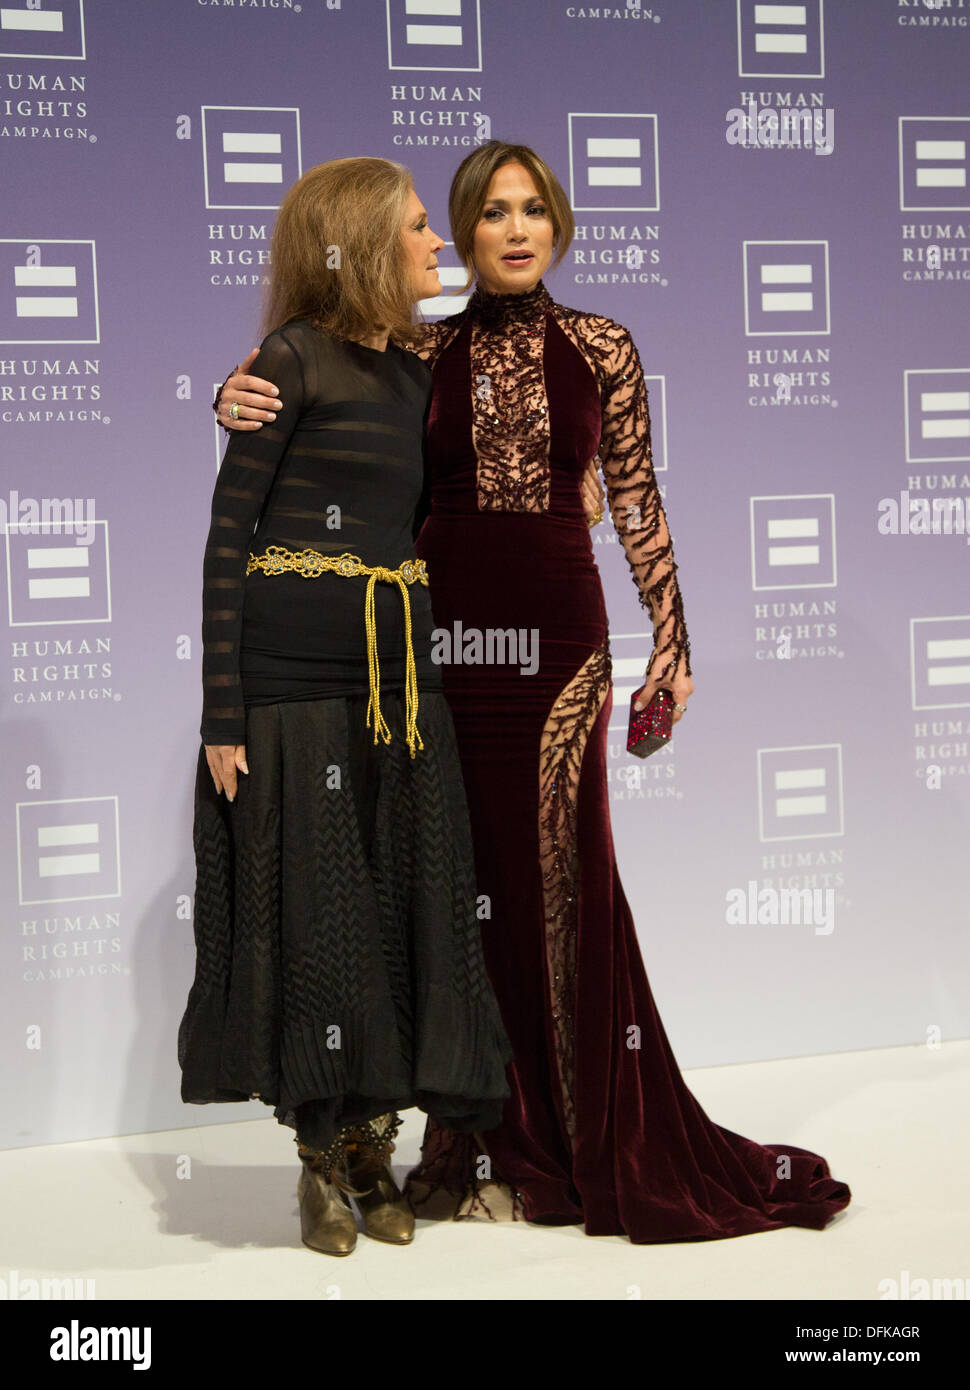 Washington DC, USA. October 5, 2013 at the Walter E. Washington Convention Center in Washington, DC. Jennifer Lopez was honored with the Ally for Equality Award. Jennifer Lopez is also the executive producer on the ABC Family Show the Fosters at The seventeenth annual Human Rights Campaign National Dinner.   Gloria Steinem is presenting along with fellow cast members of the hit show produced by Jennifer Lopez 'The Foster' on Disney's ABC Family Channel. Stock Photo